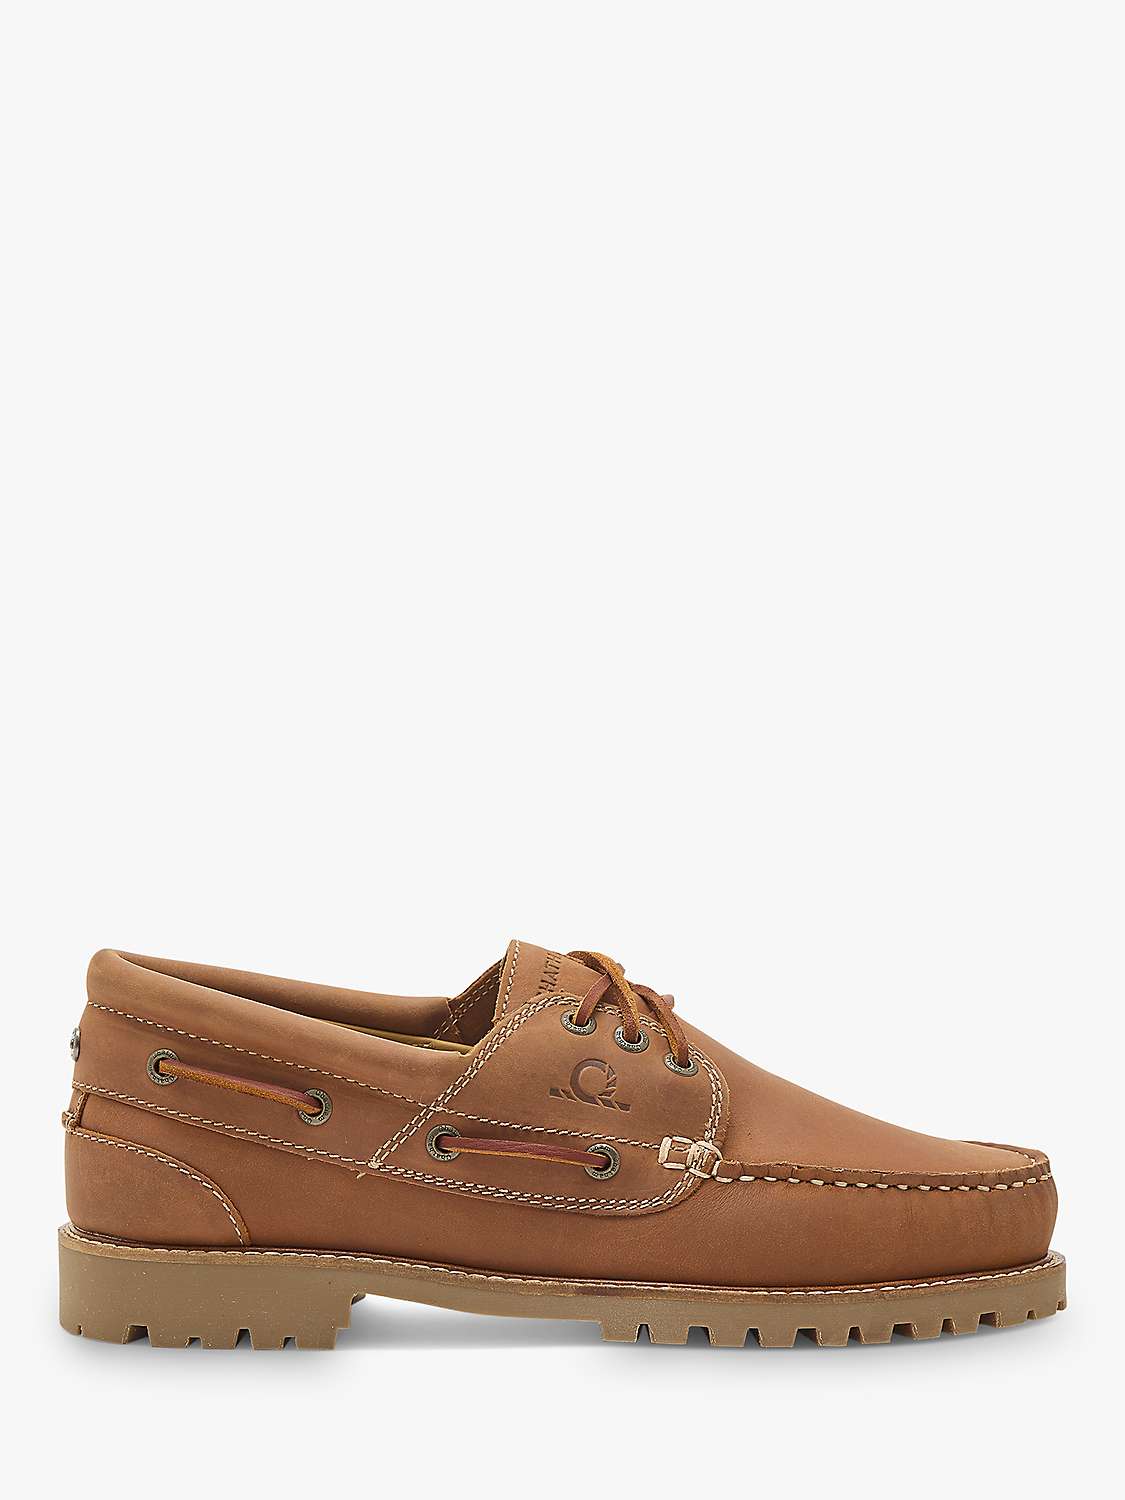 Buy Chatham Sperrin Leather Boat Shoes, Tan Online at johnlewis.com